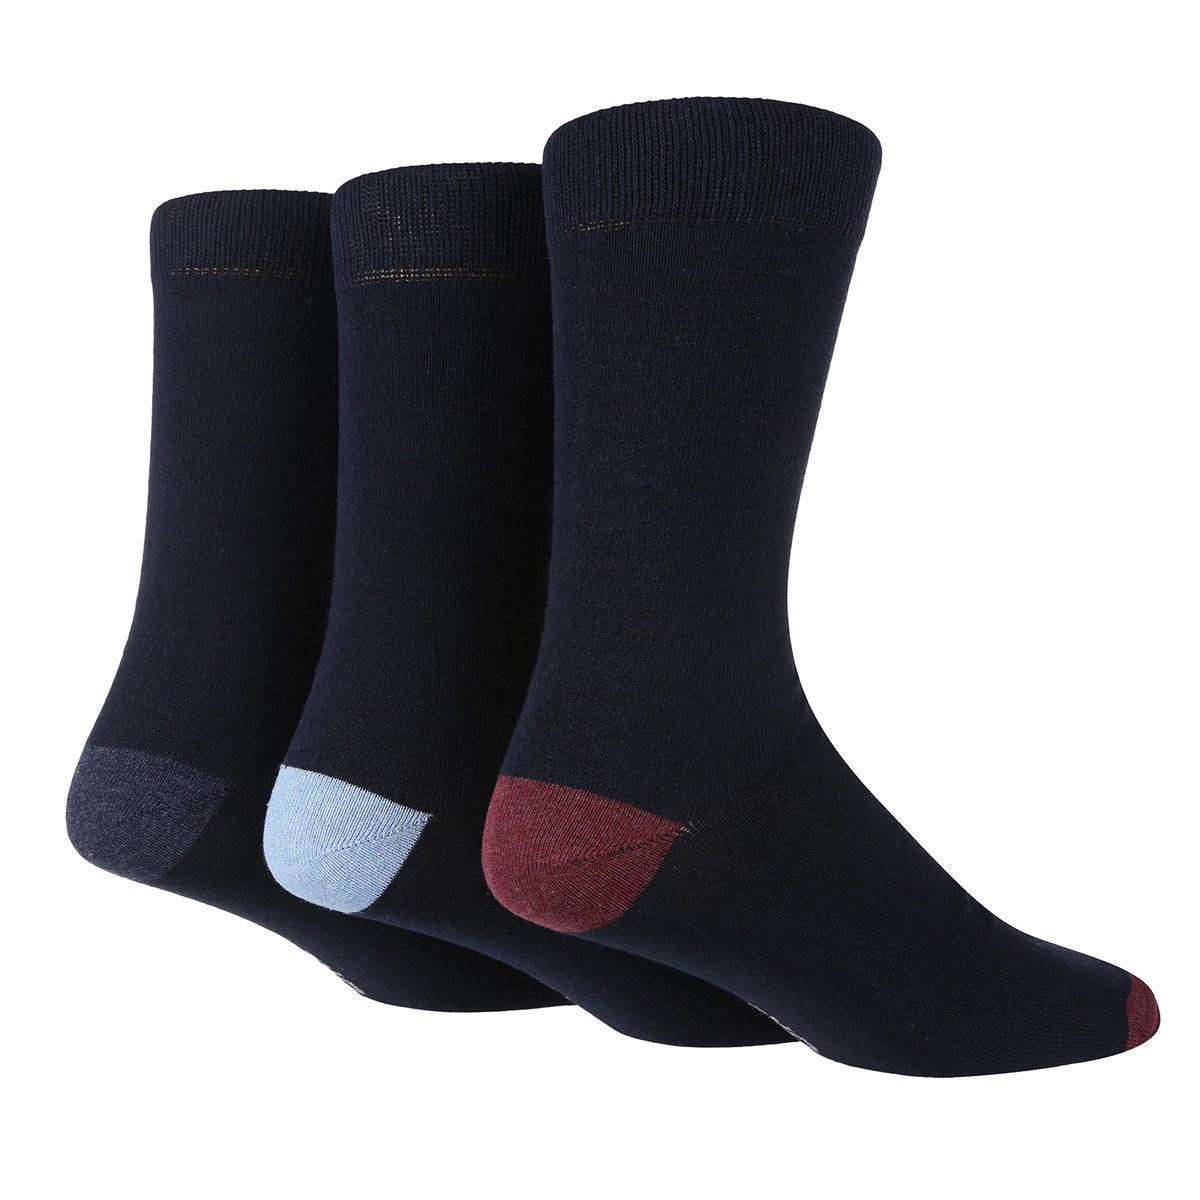 Men's Plain Socks with Contrast Heel and Toe - 3 Pairs